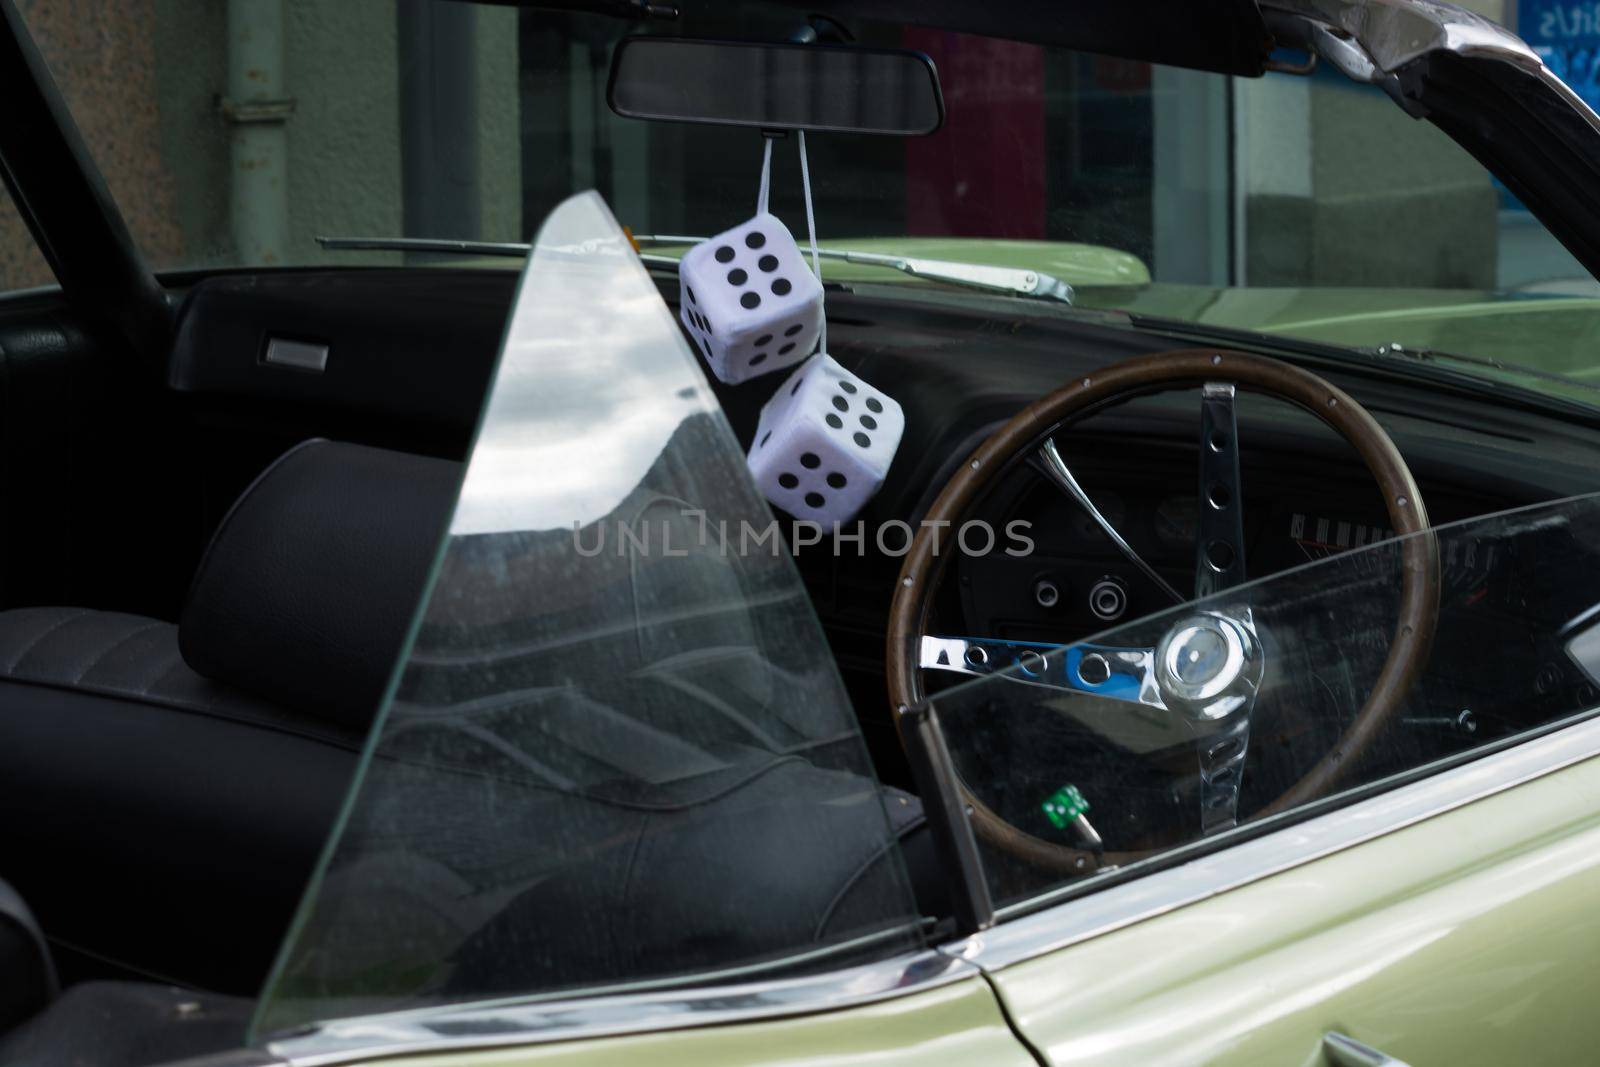 Fuzzy Dice on the rearview mirror of a vintage American car